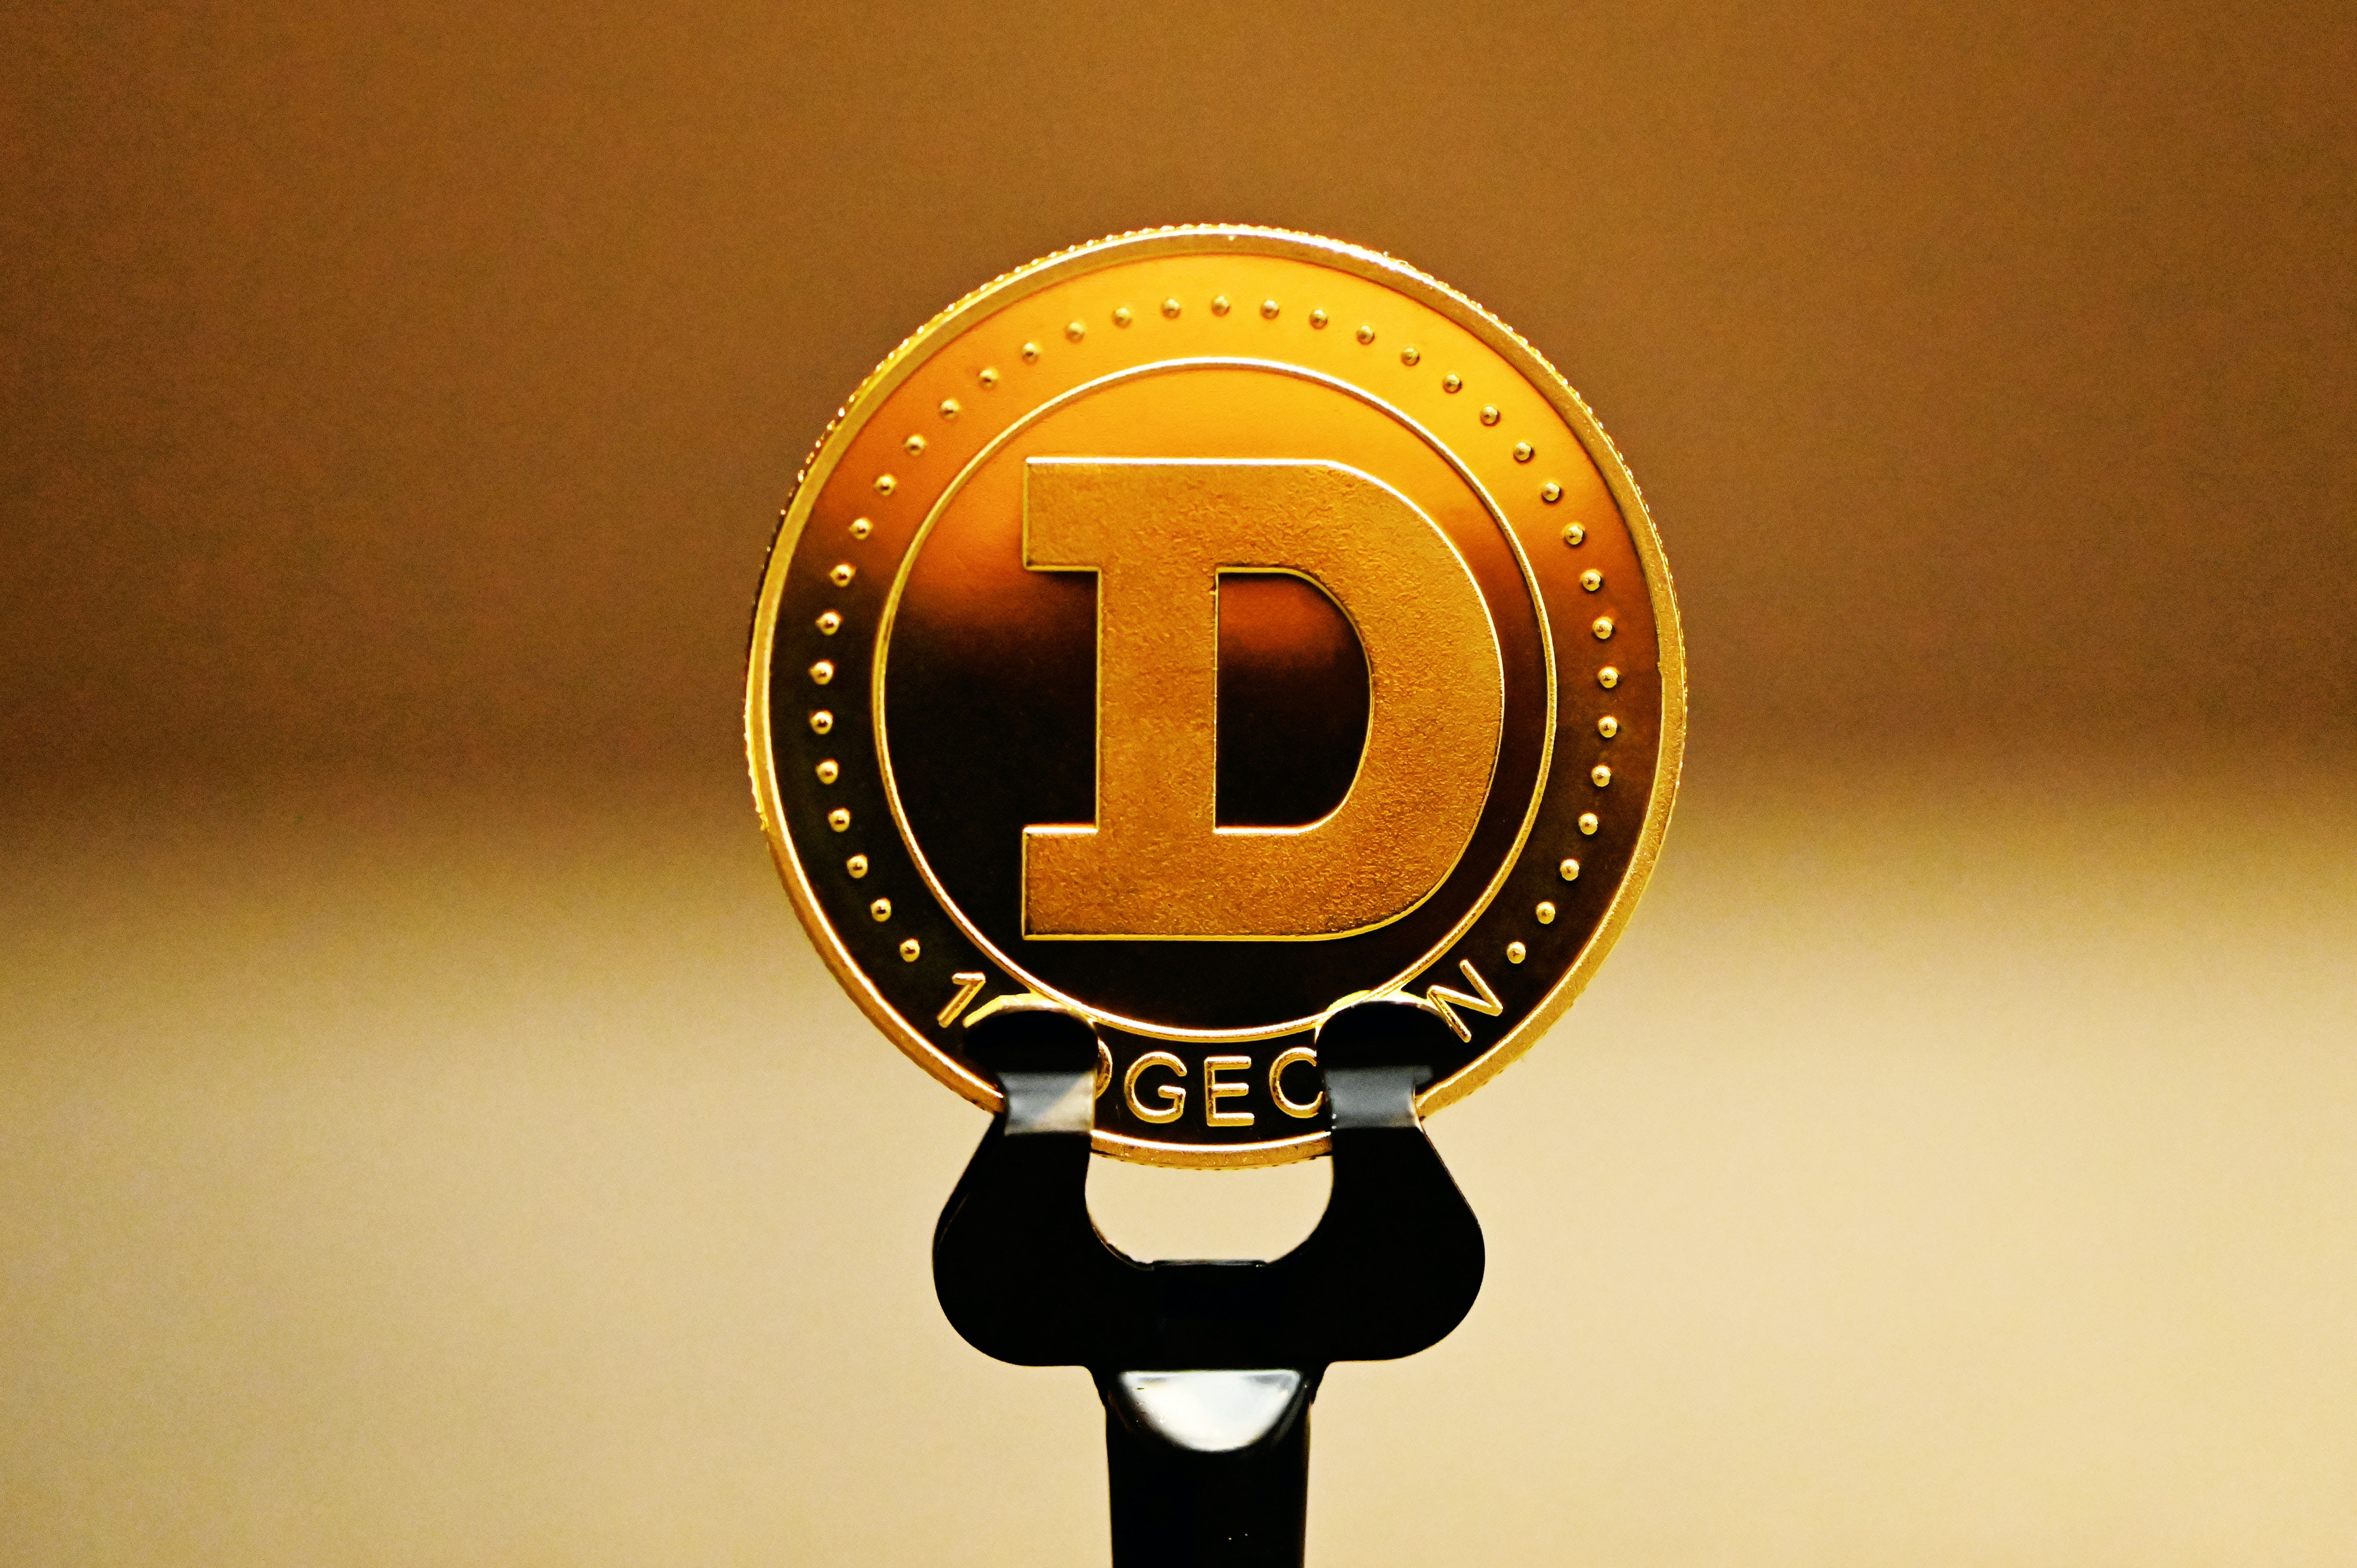 For Dogecoin To Succeed, Contribution Ranging From 'Making Memes' To Supporting 'Good Causes' Needed, Says Co-Founder